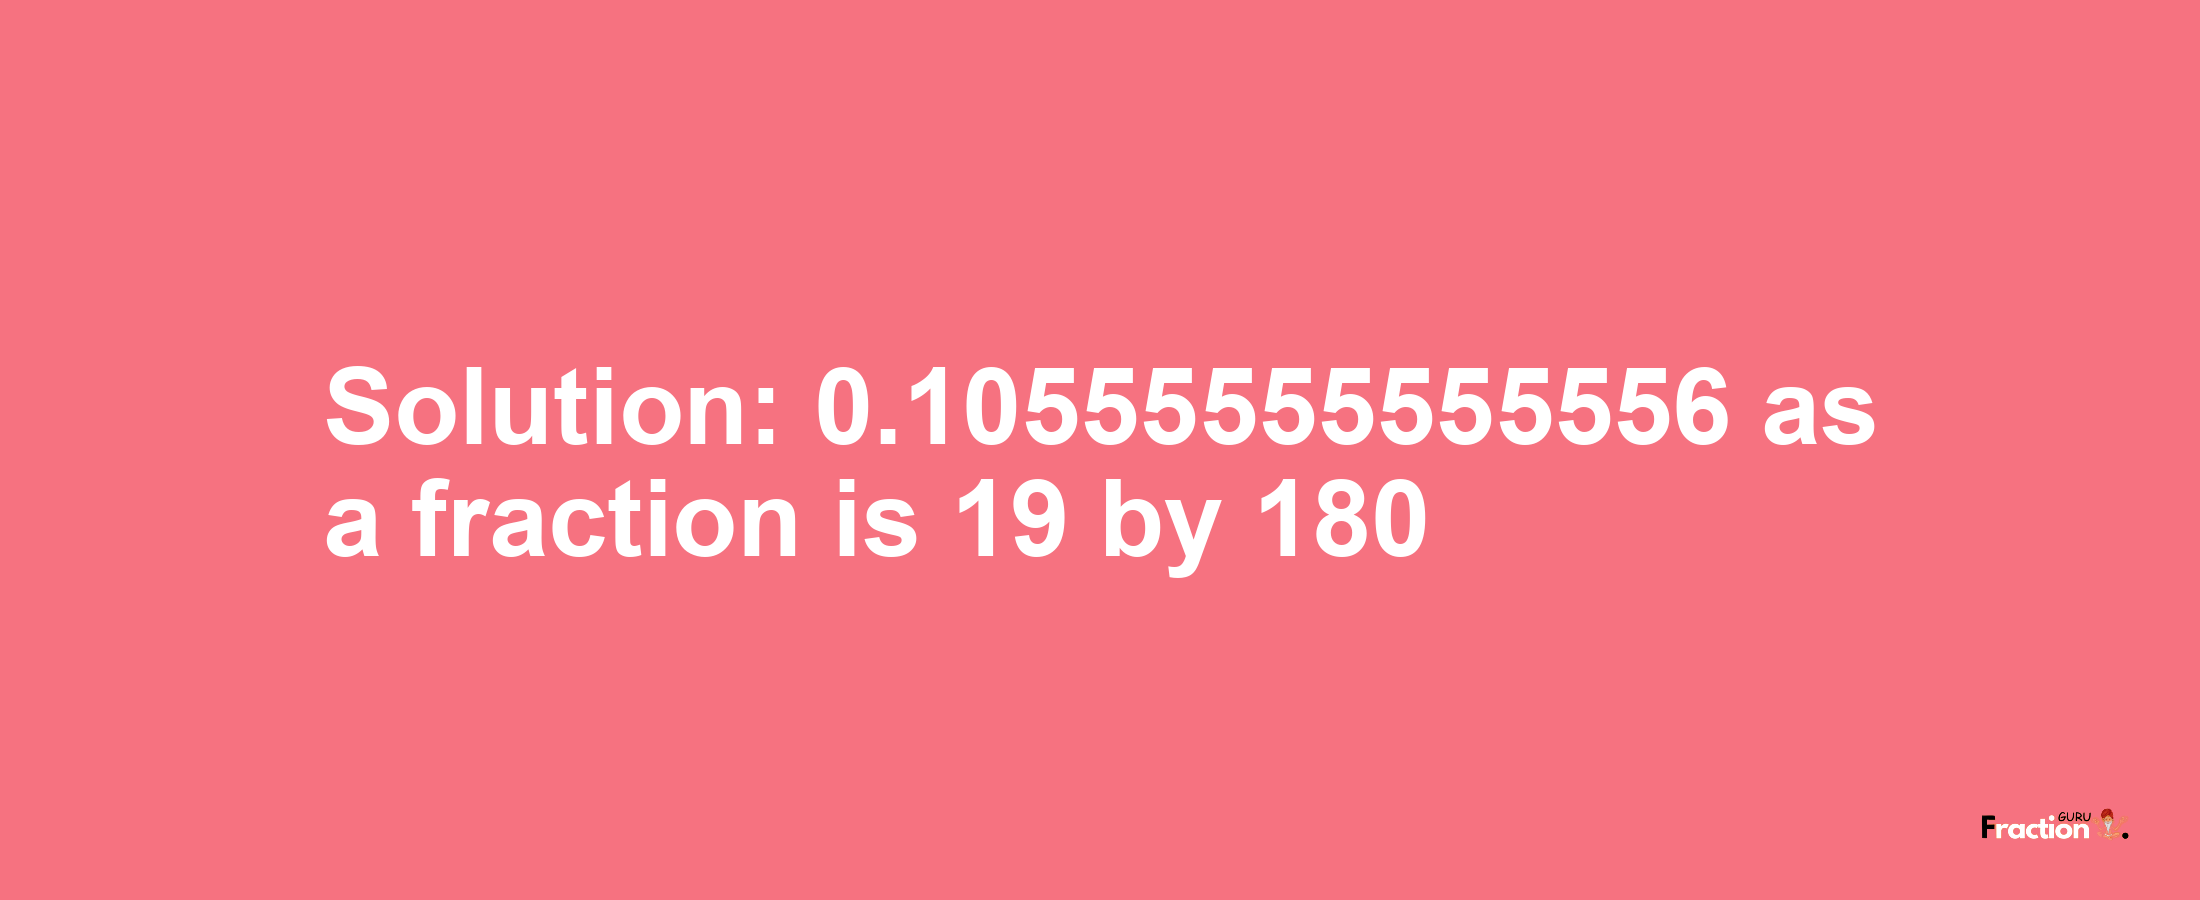 Solution:0.10555555555556 as a fraction is 19/180